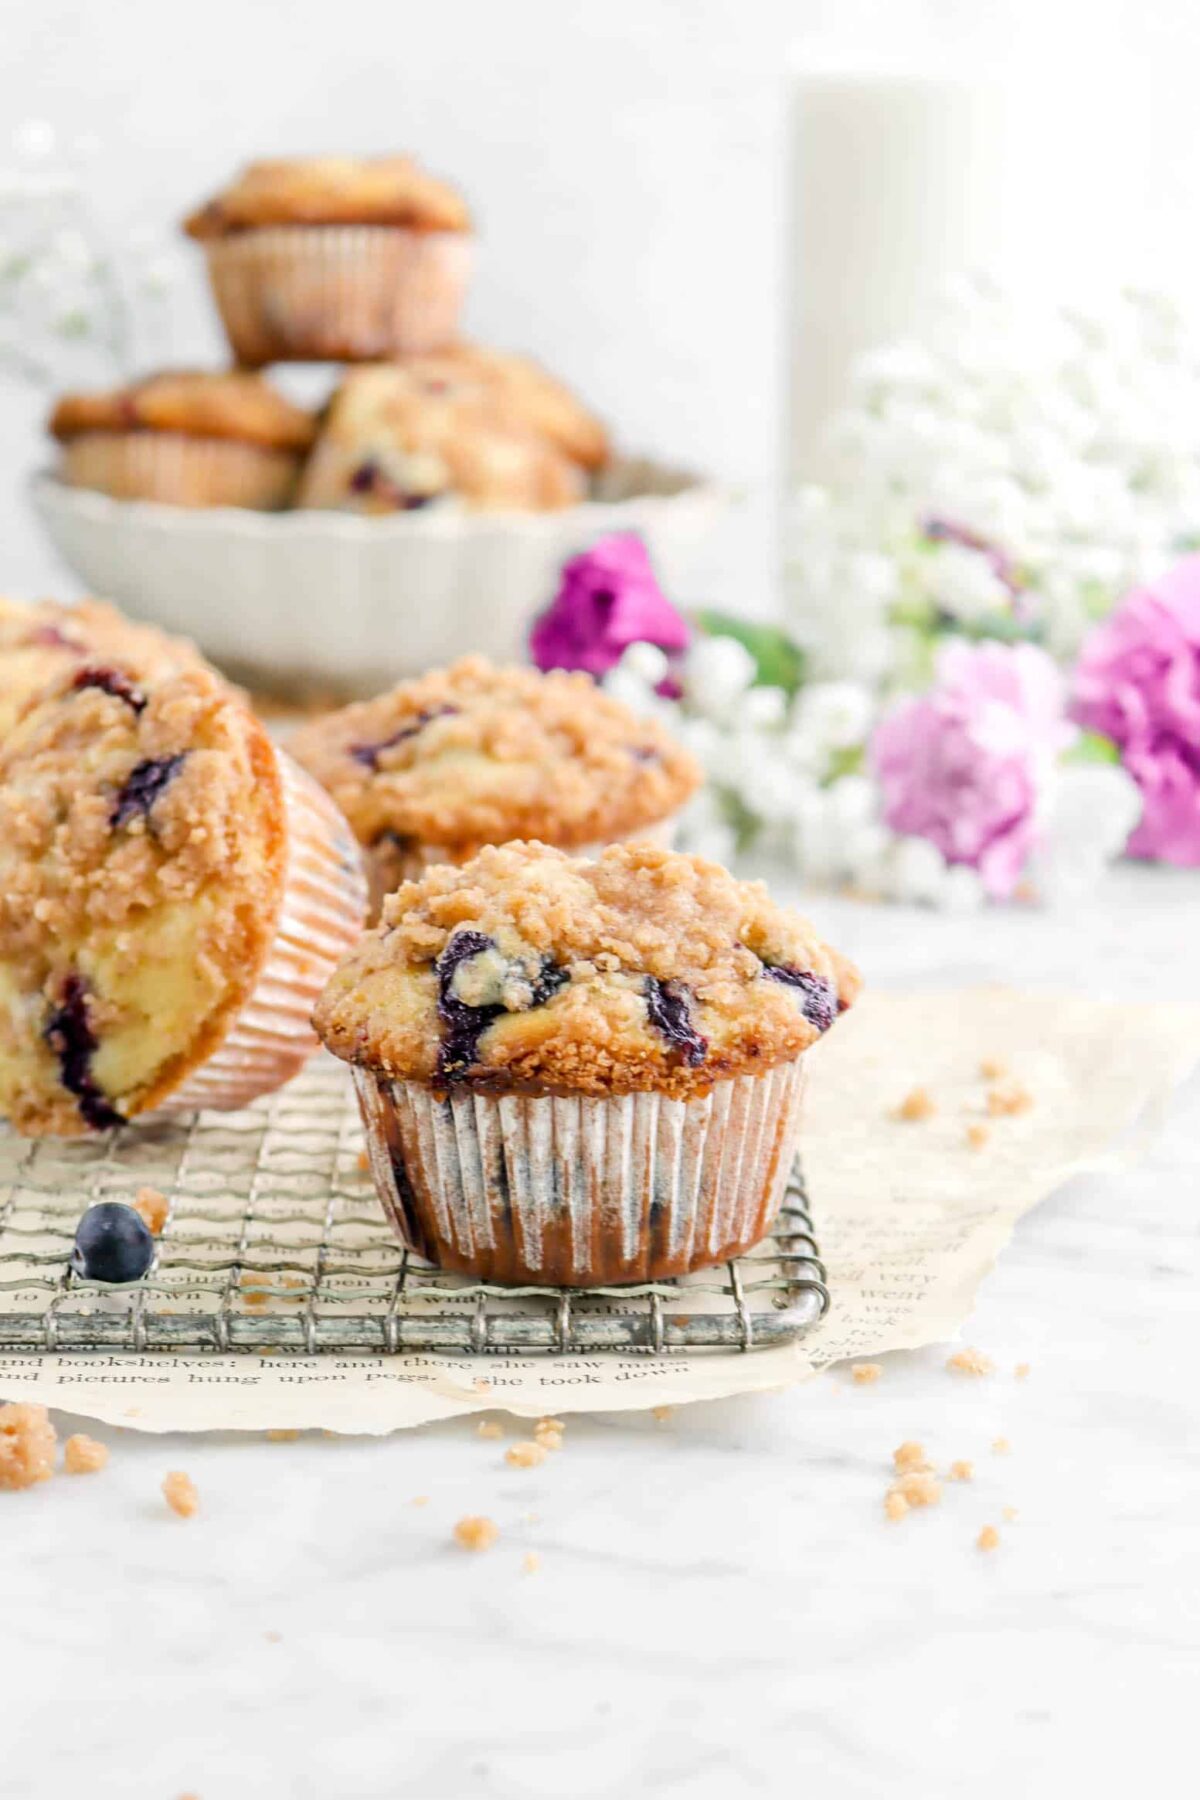 Better Than a Bakery Lemon Blueberry Muffins with Cinnamon Streusel